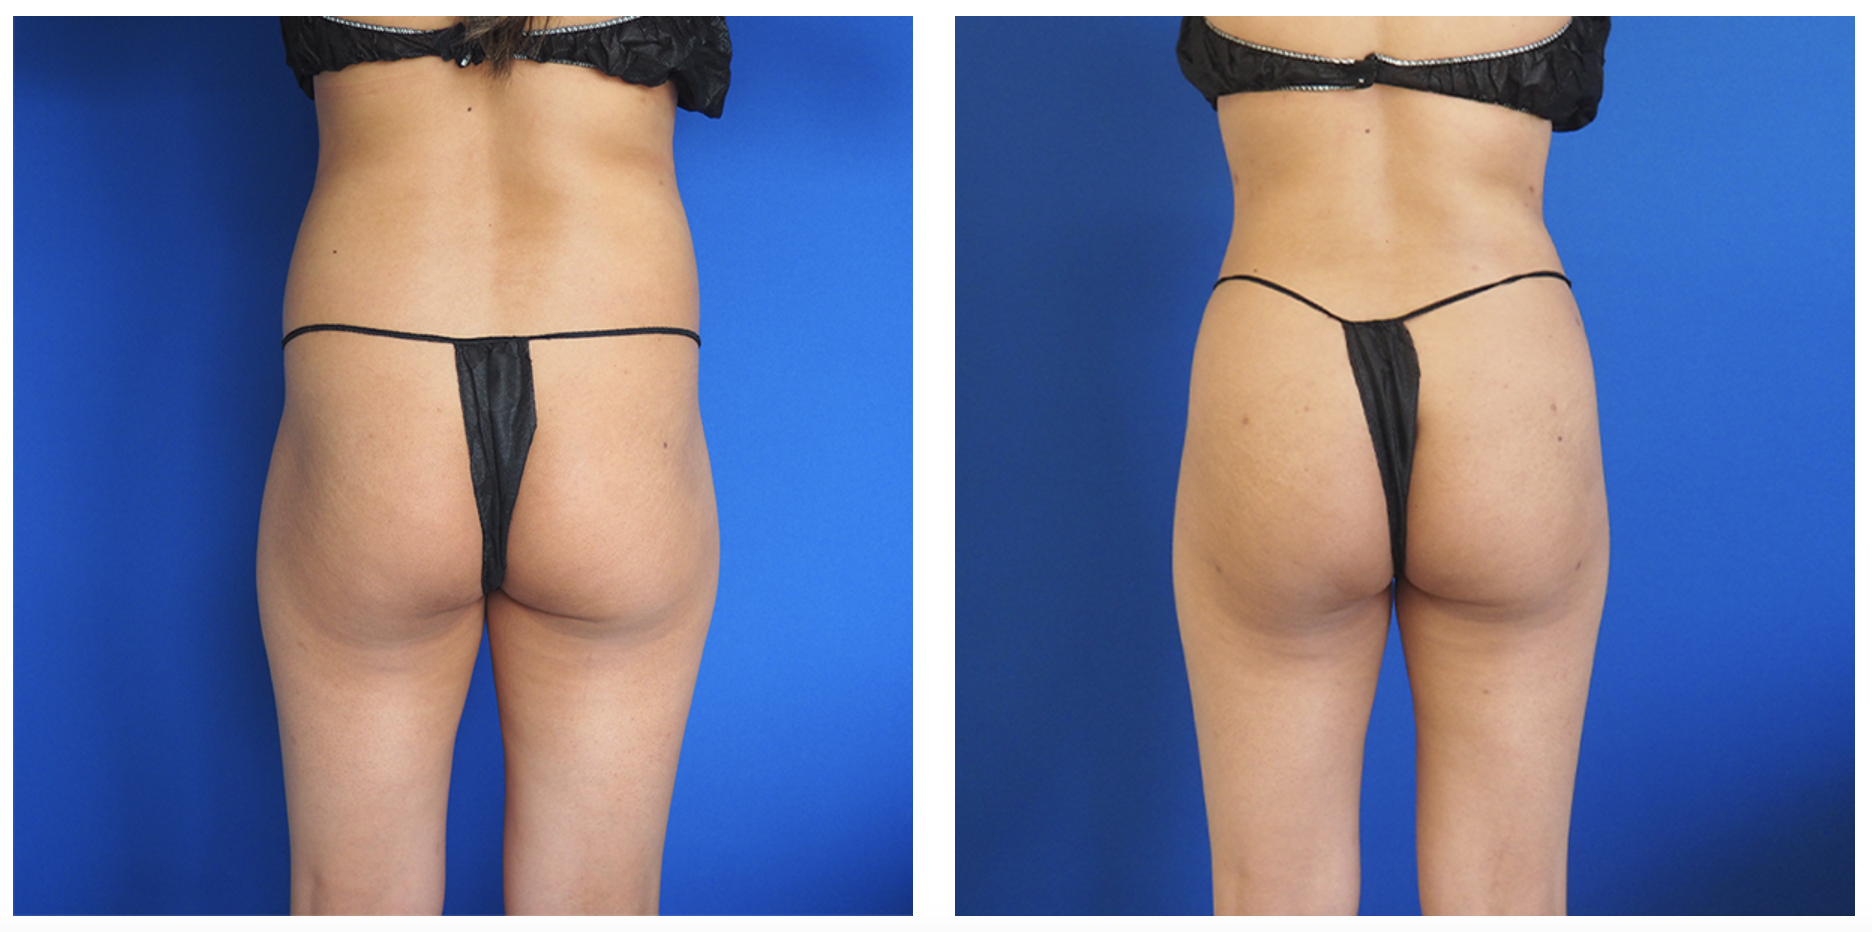 This patient had liposuction of the abdomen, flanks, and back in addition to hip re-shaping with natural fat transfer.